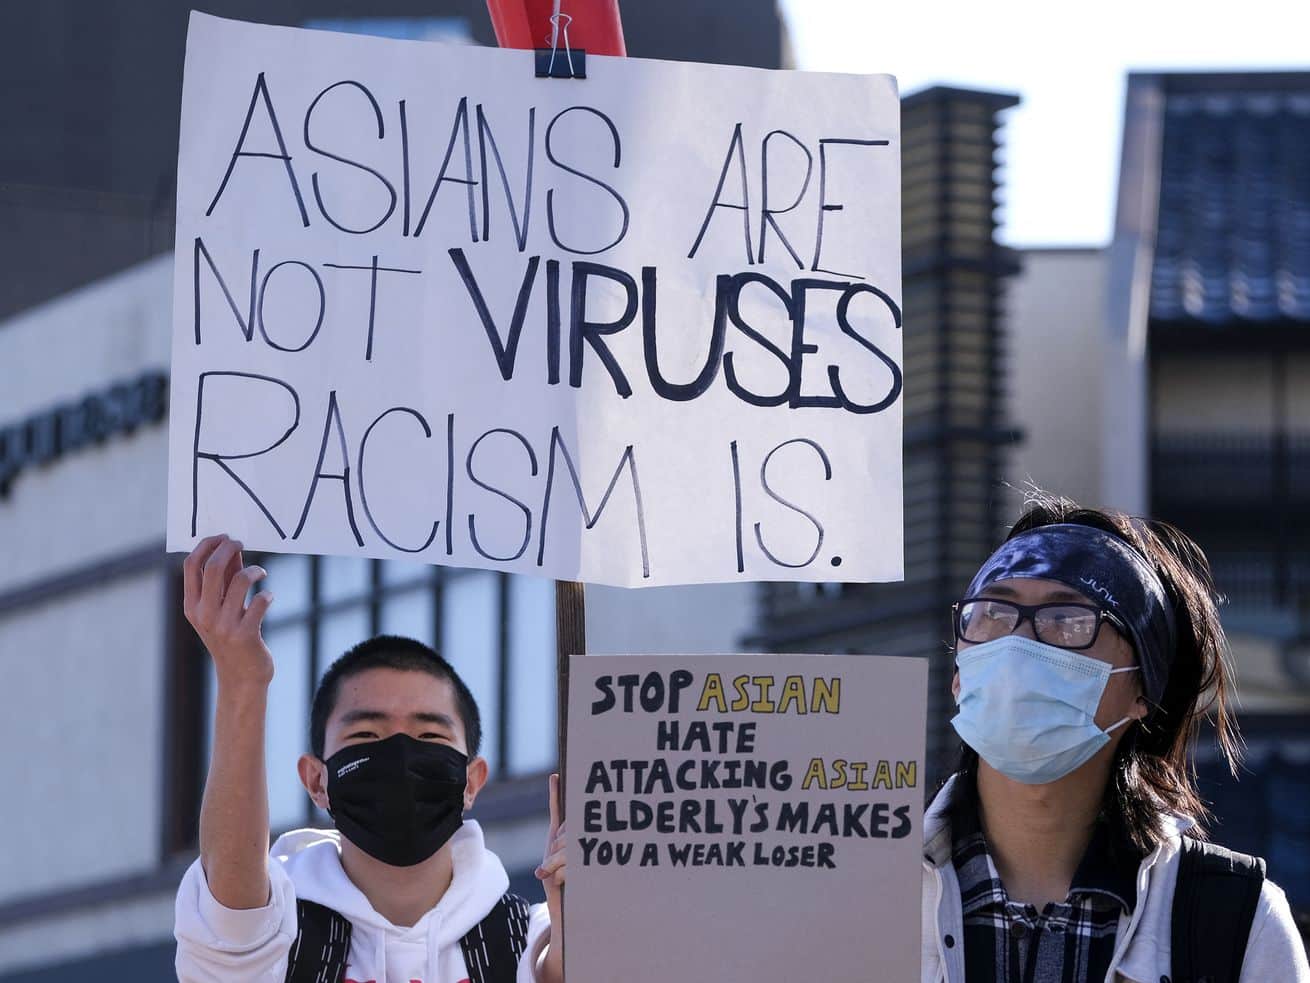 “We’re both the comfortable and the afflicted”: What gets overlooked when we talk about anti-Asian racism